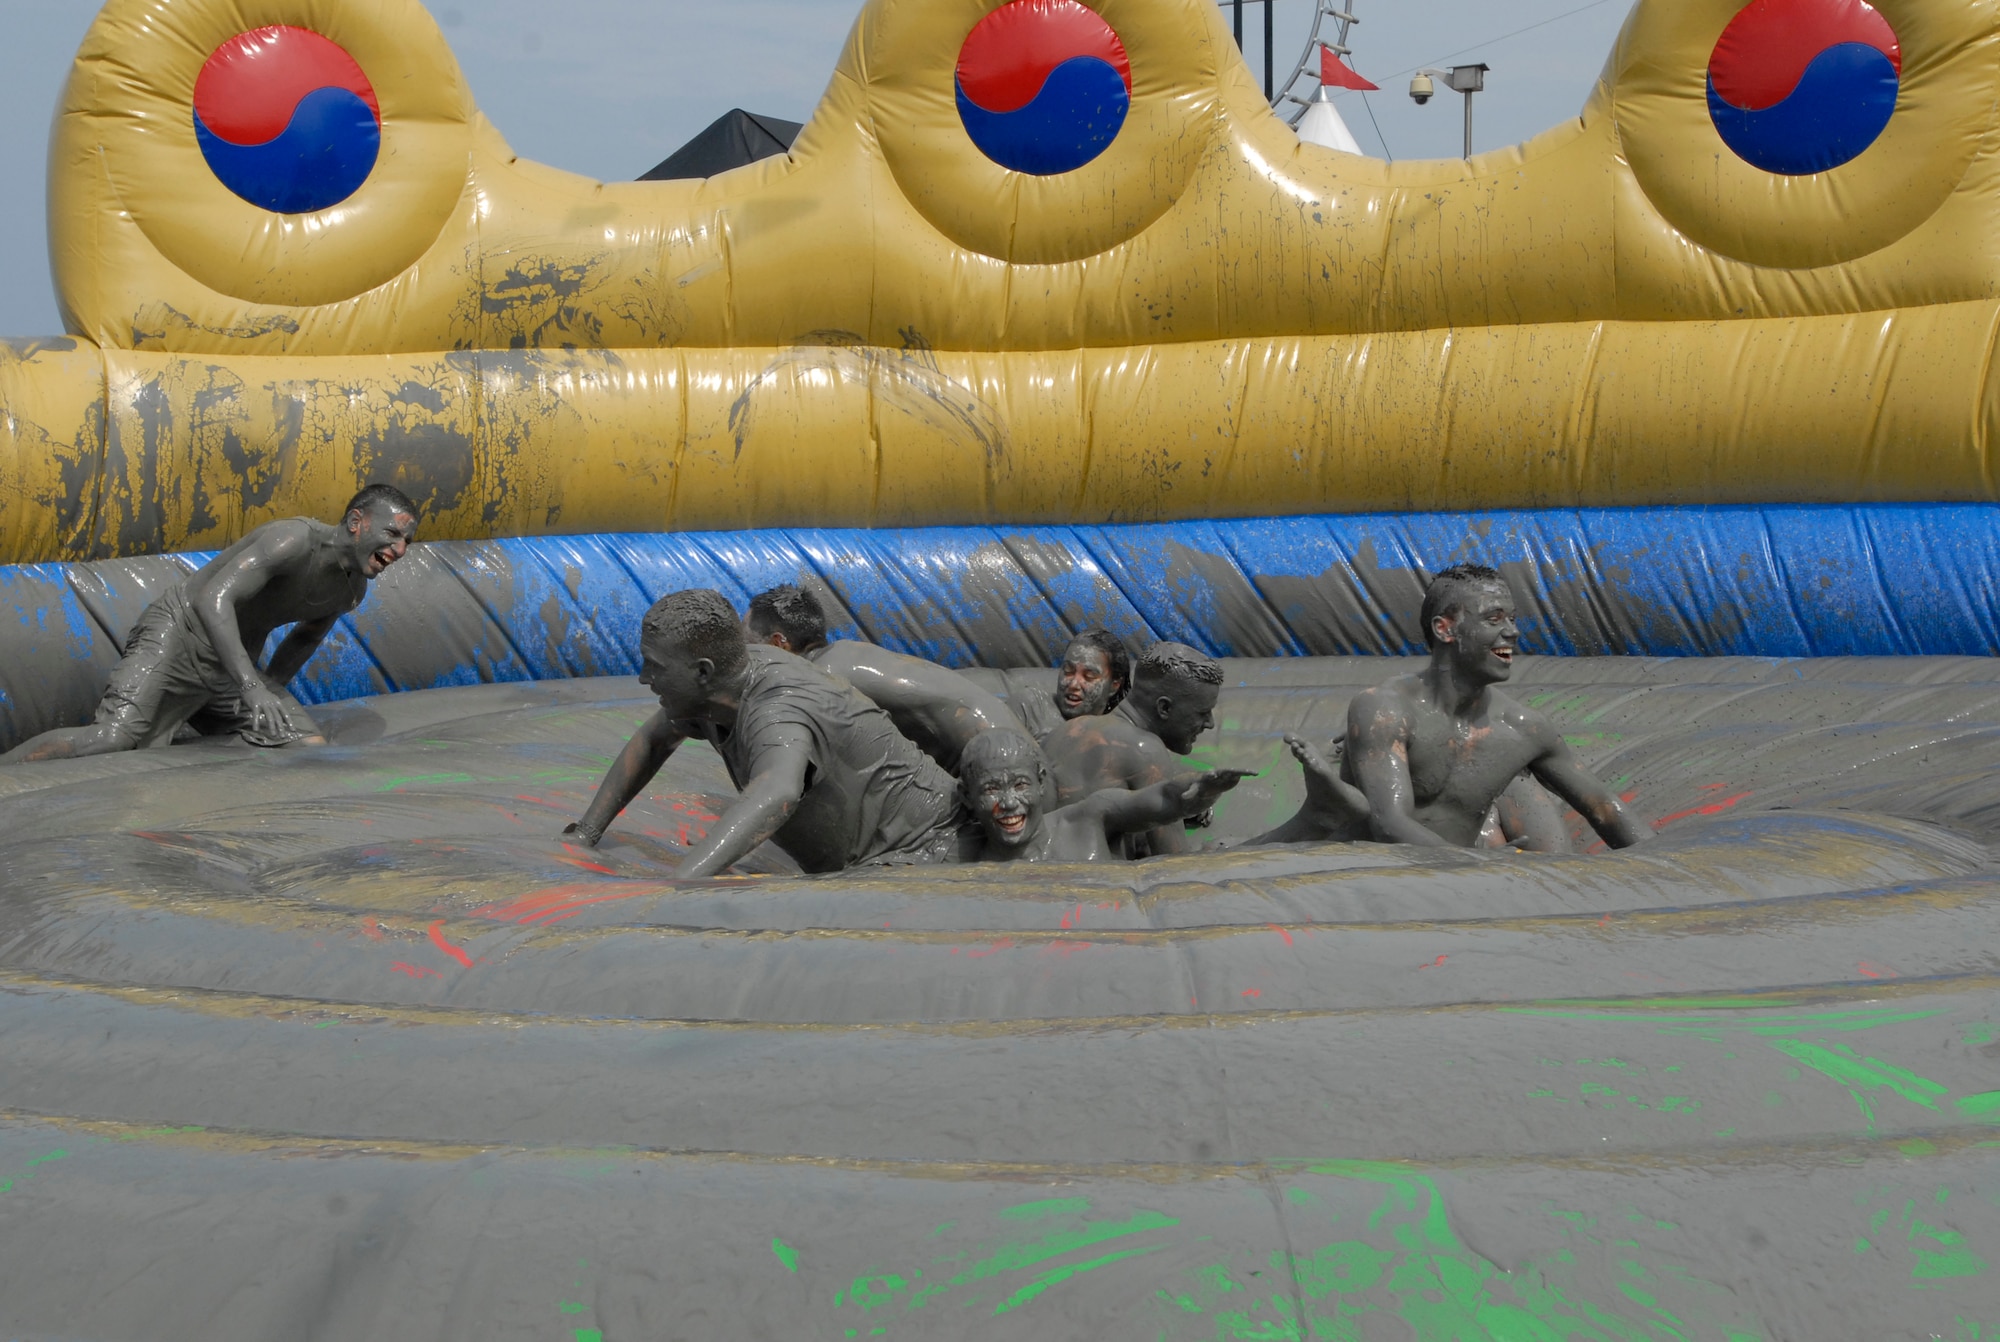 United States servicemembers from all over the Korean Peninsula came together and took part in the annual Boryeong Mud Festival at Daecheon Beach July 12. The festival had mud wrestling, slides, massages, mineral rich spas as well as parades and cultural performances. The 8th Force Support Squadron provided the trip for Wolf Pack members and offers numerous trips around Korea throughout the year. (U.S. Air Force Photo by Senior Airman Dana Hill)